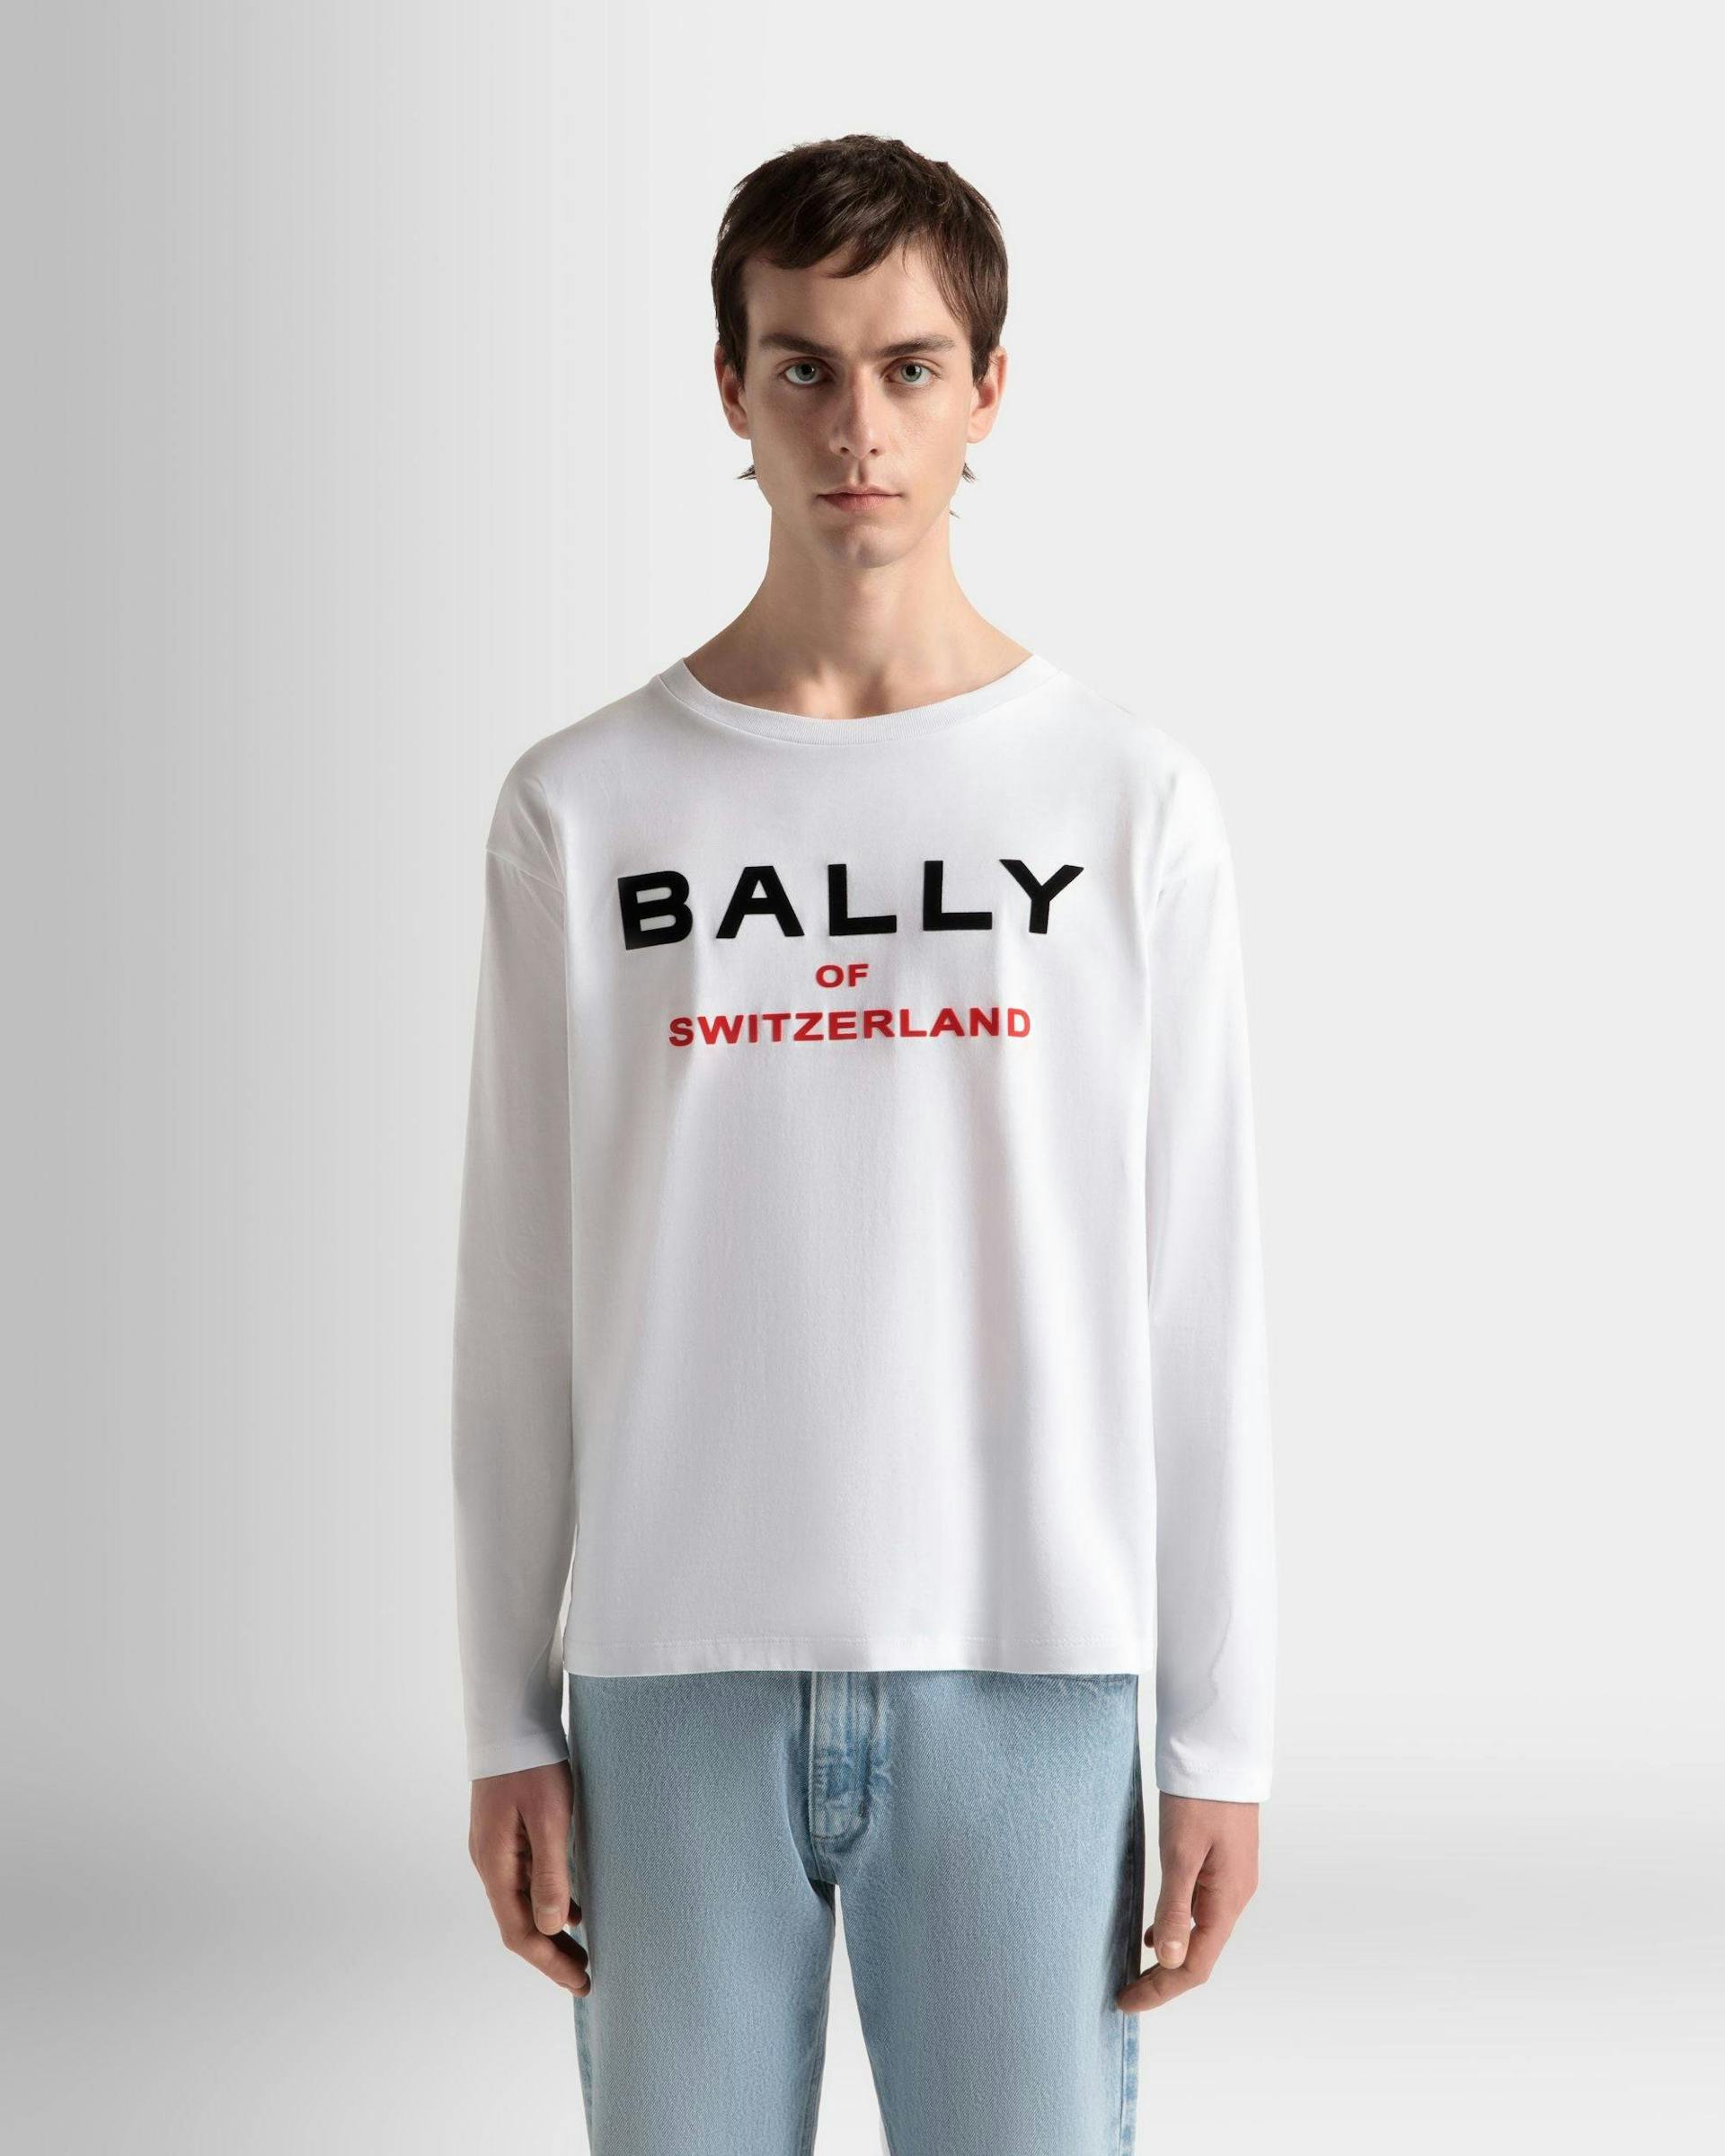 Men's T-Shirt In White Cotton | Bally | On Model Close Up